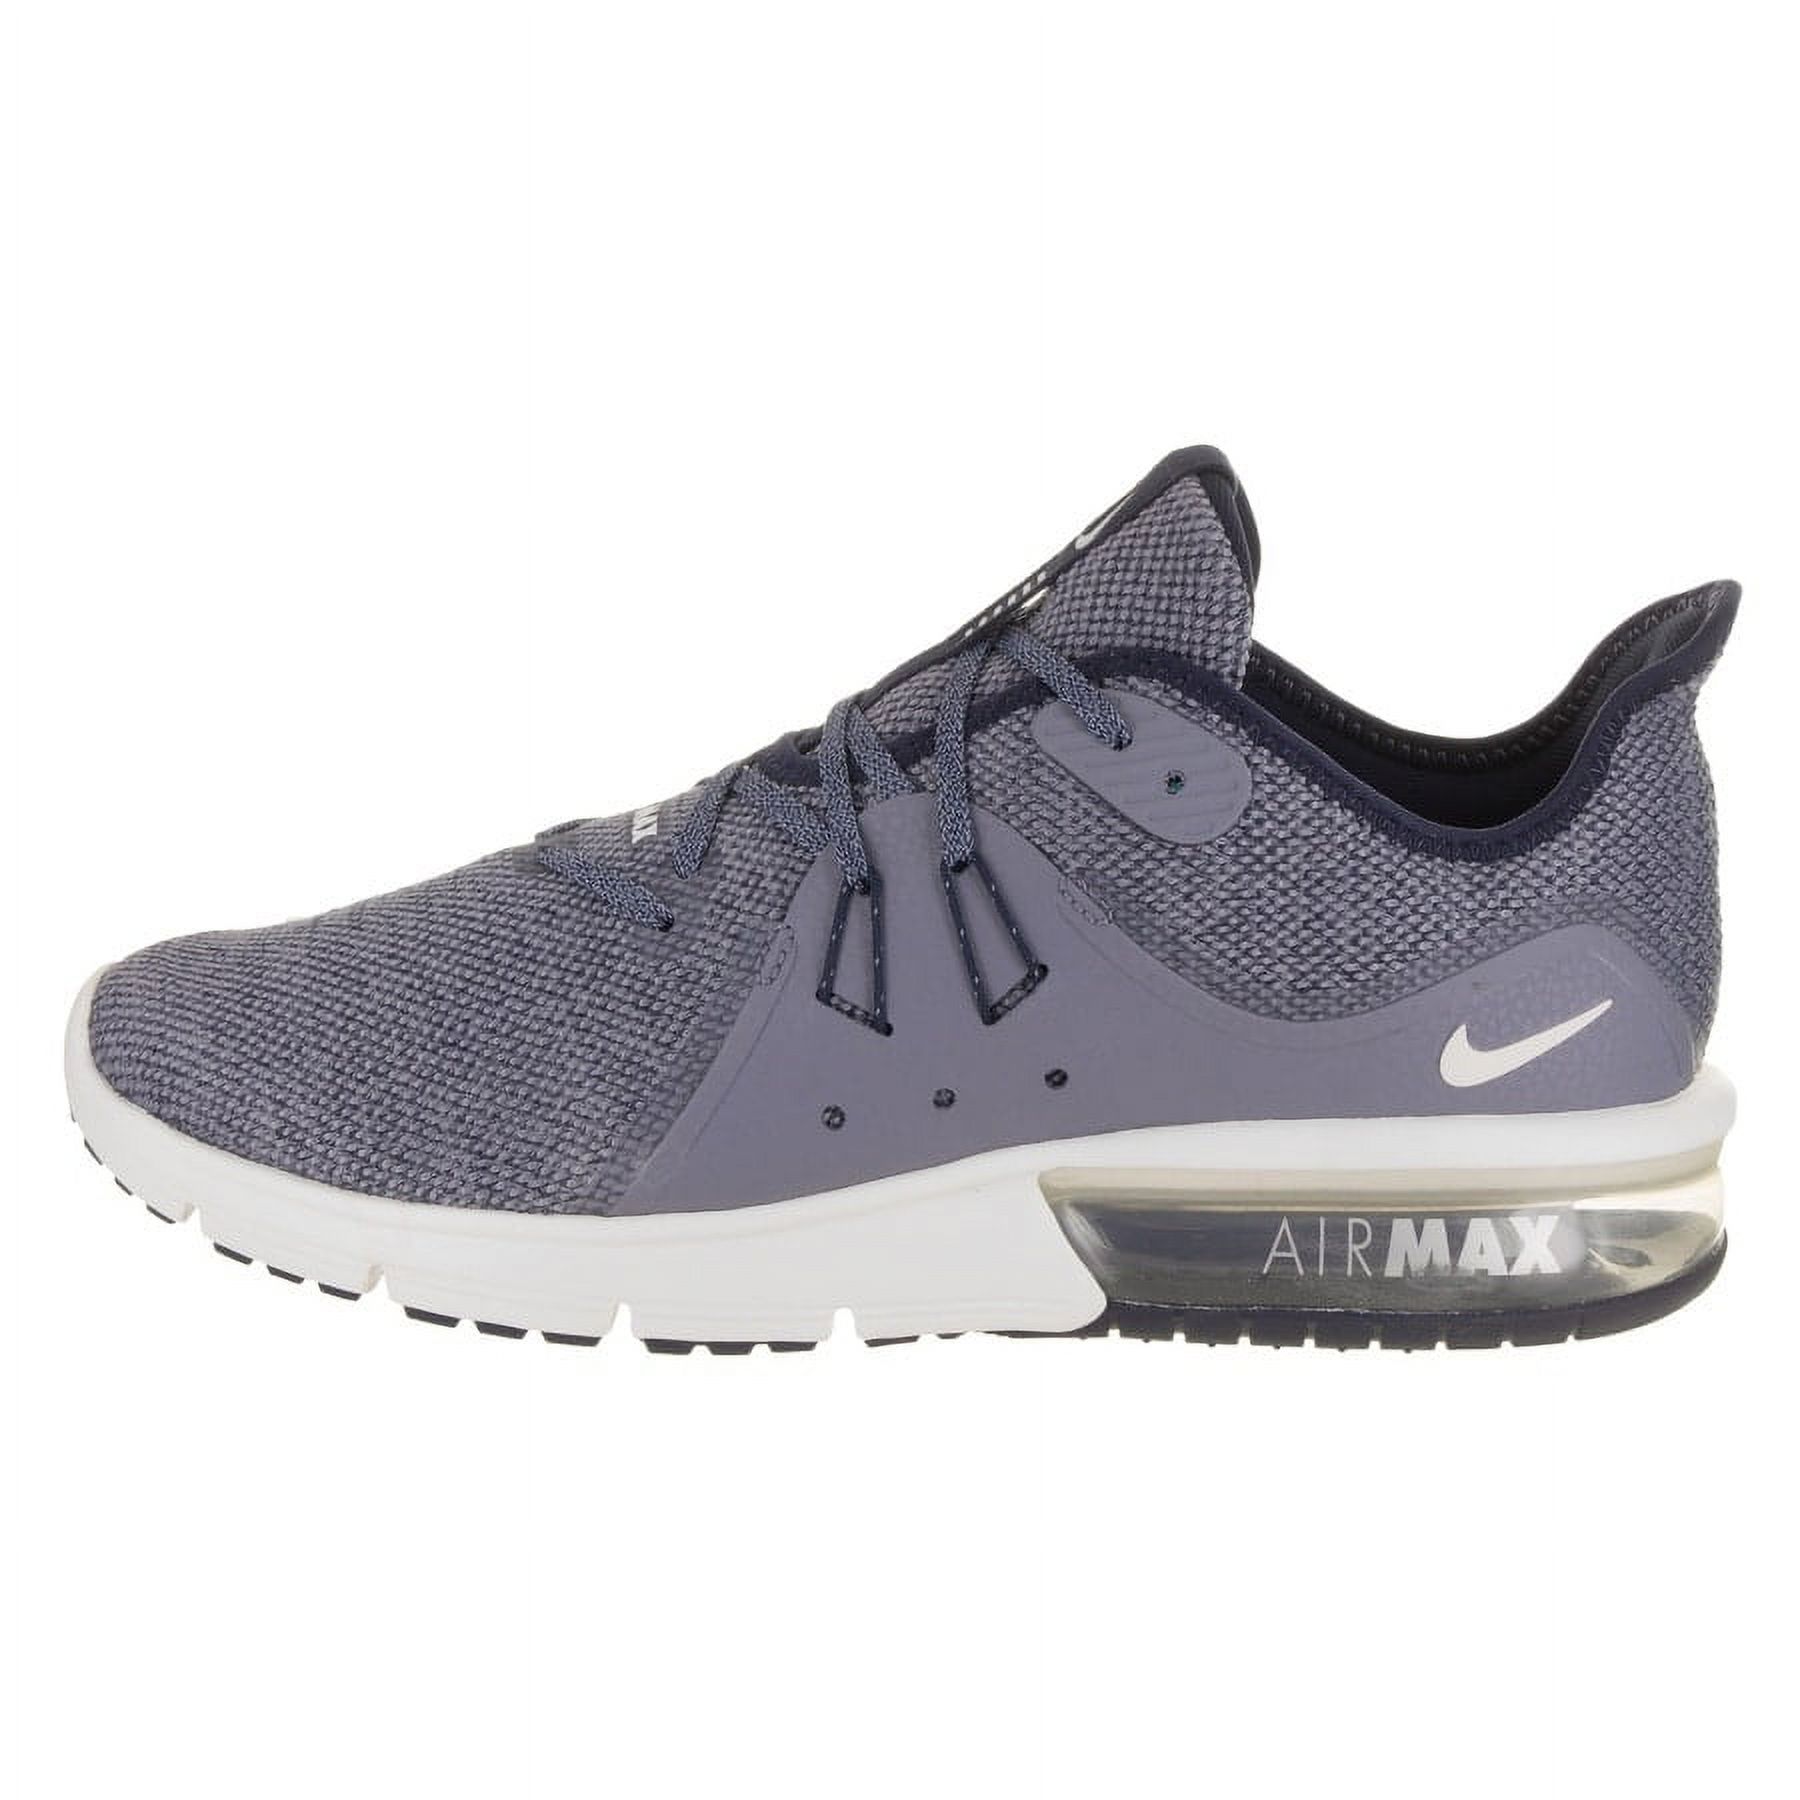 Nike Men's Air Max Sequent 3 Running Shoe - image 4 of 5